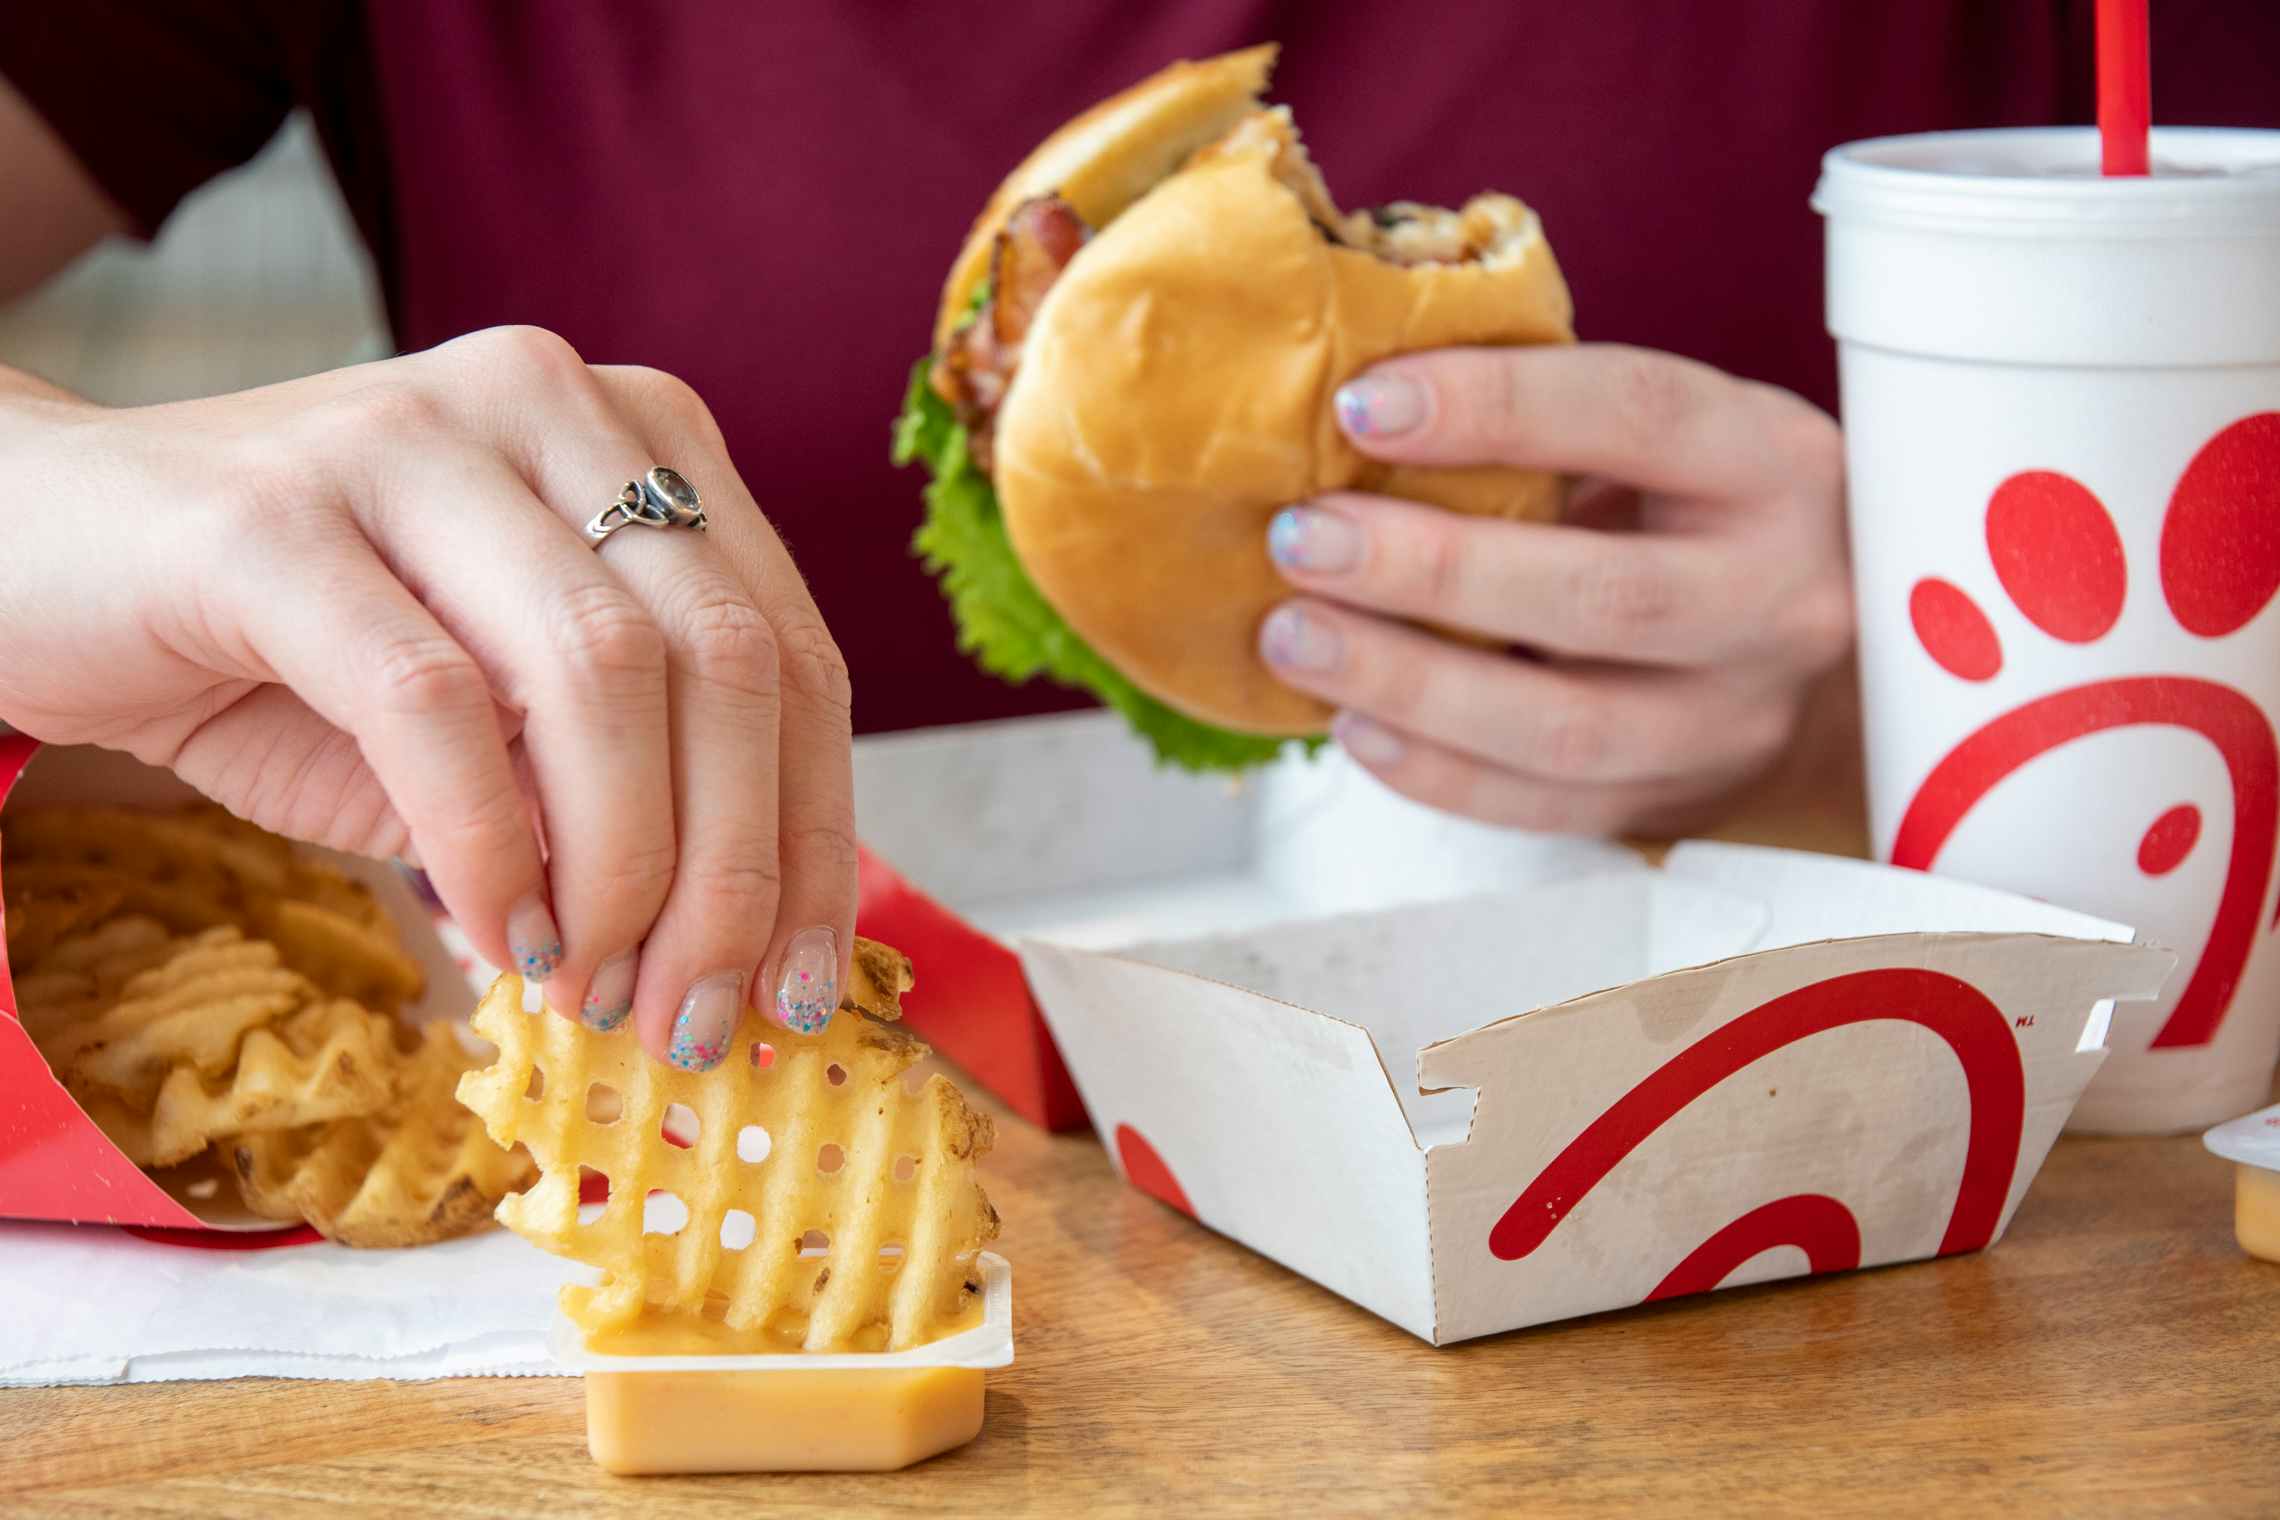 A person eating a Chick-fil-A meal while sitting at a table.